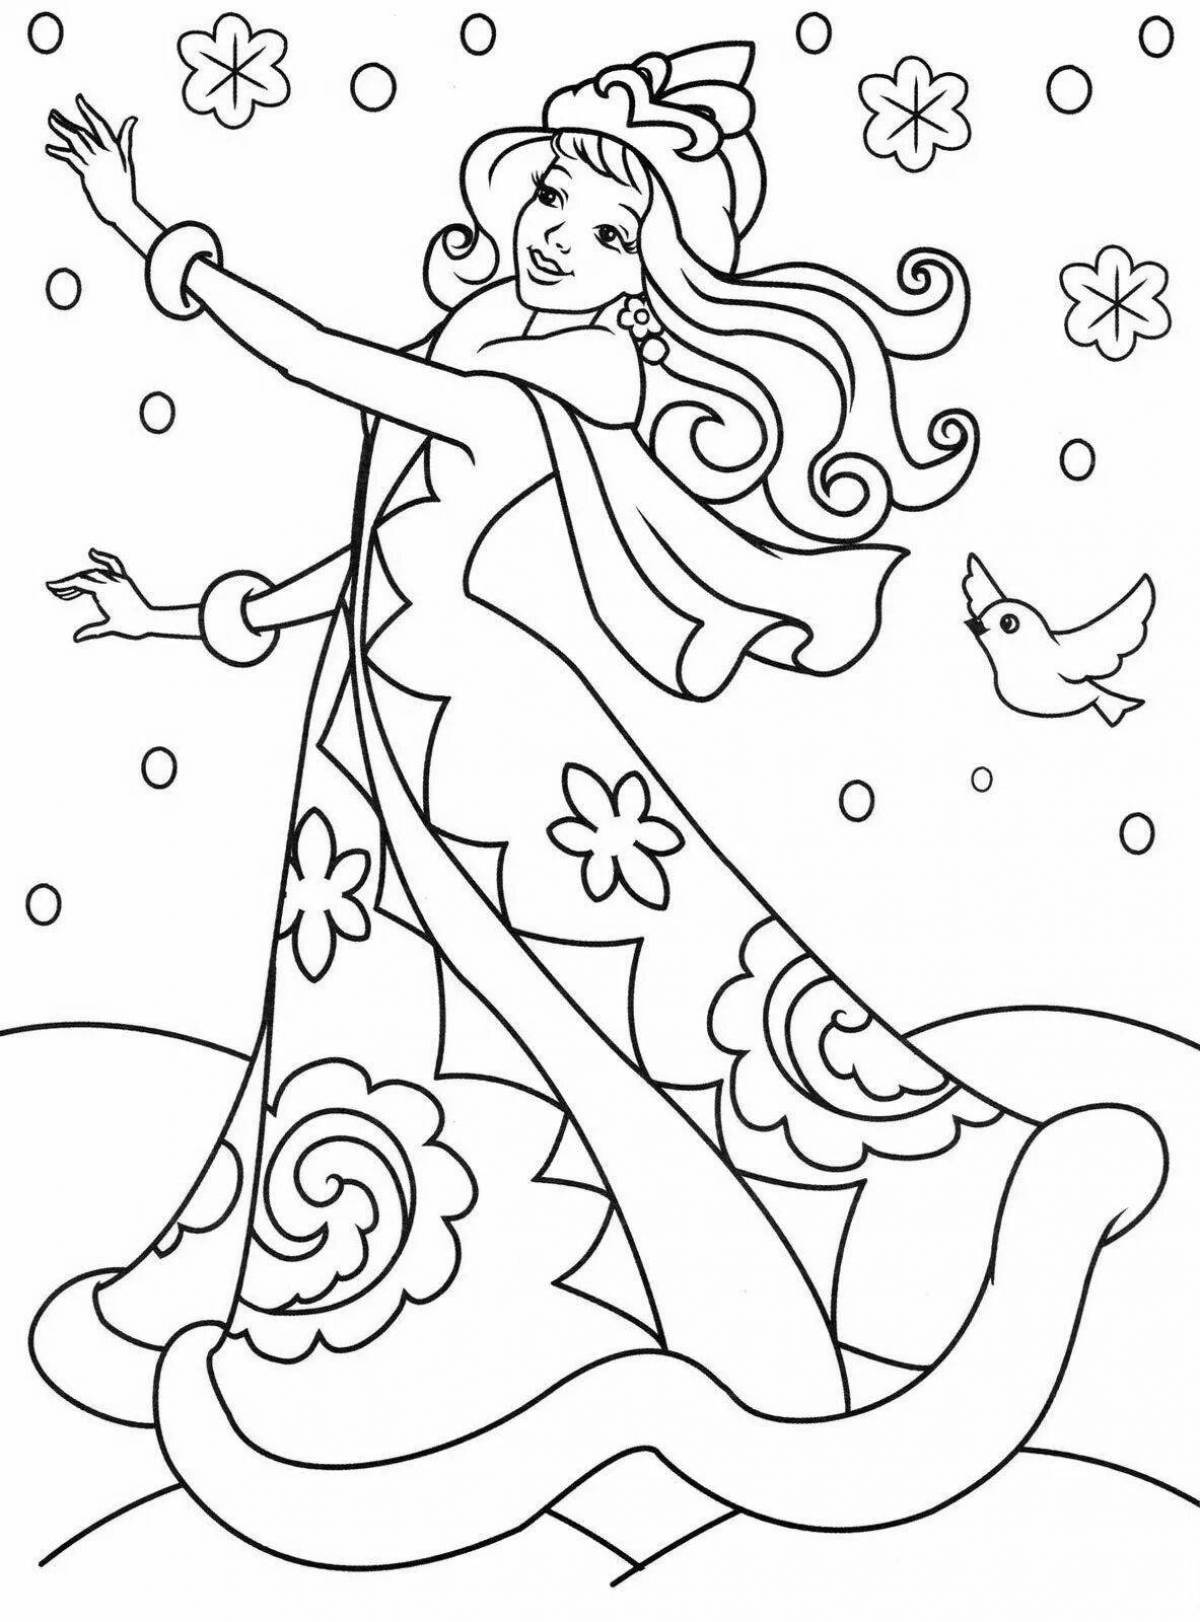 Snow Maiden live coloring